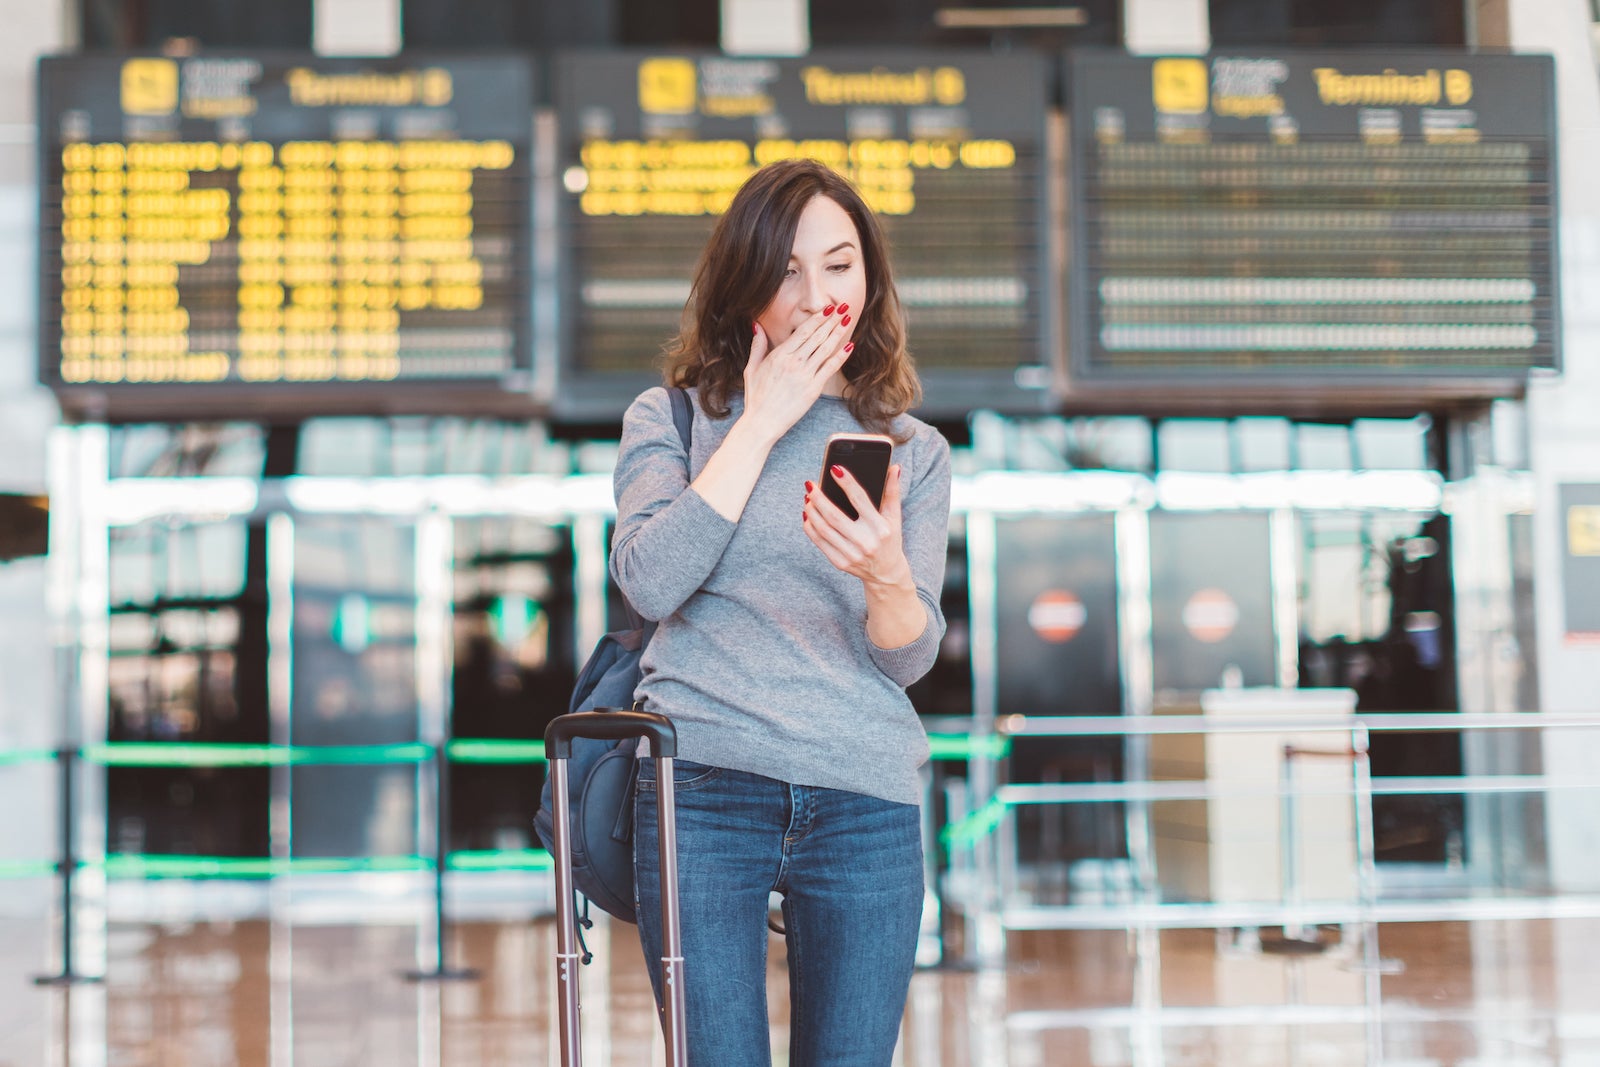 Image of excited, shocked young beautiful woman, standing in airport with smartphone in her hands - missed or cancelled flight concept - flight information board in background